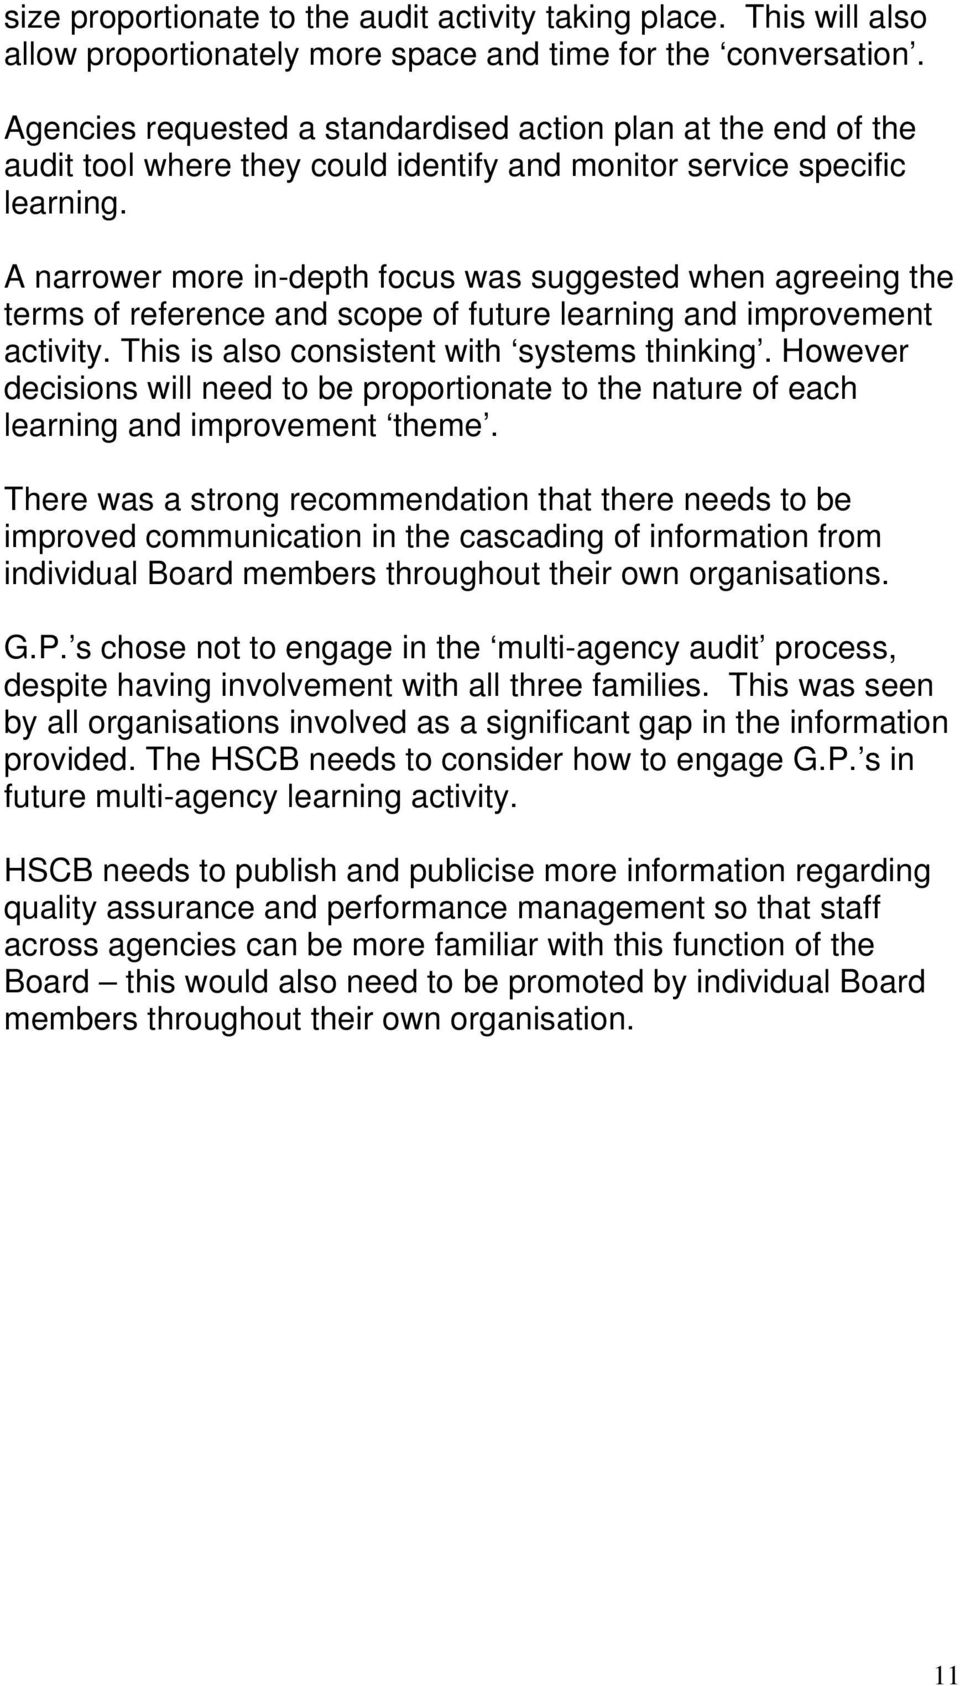 A narrower more in-depth focus was suggested when agreeing the terms of reference and scope of future learning and improvement activity. This is also consistent with systems thinking.